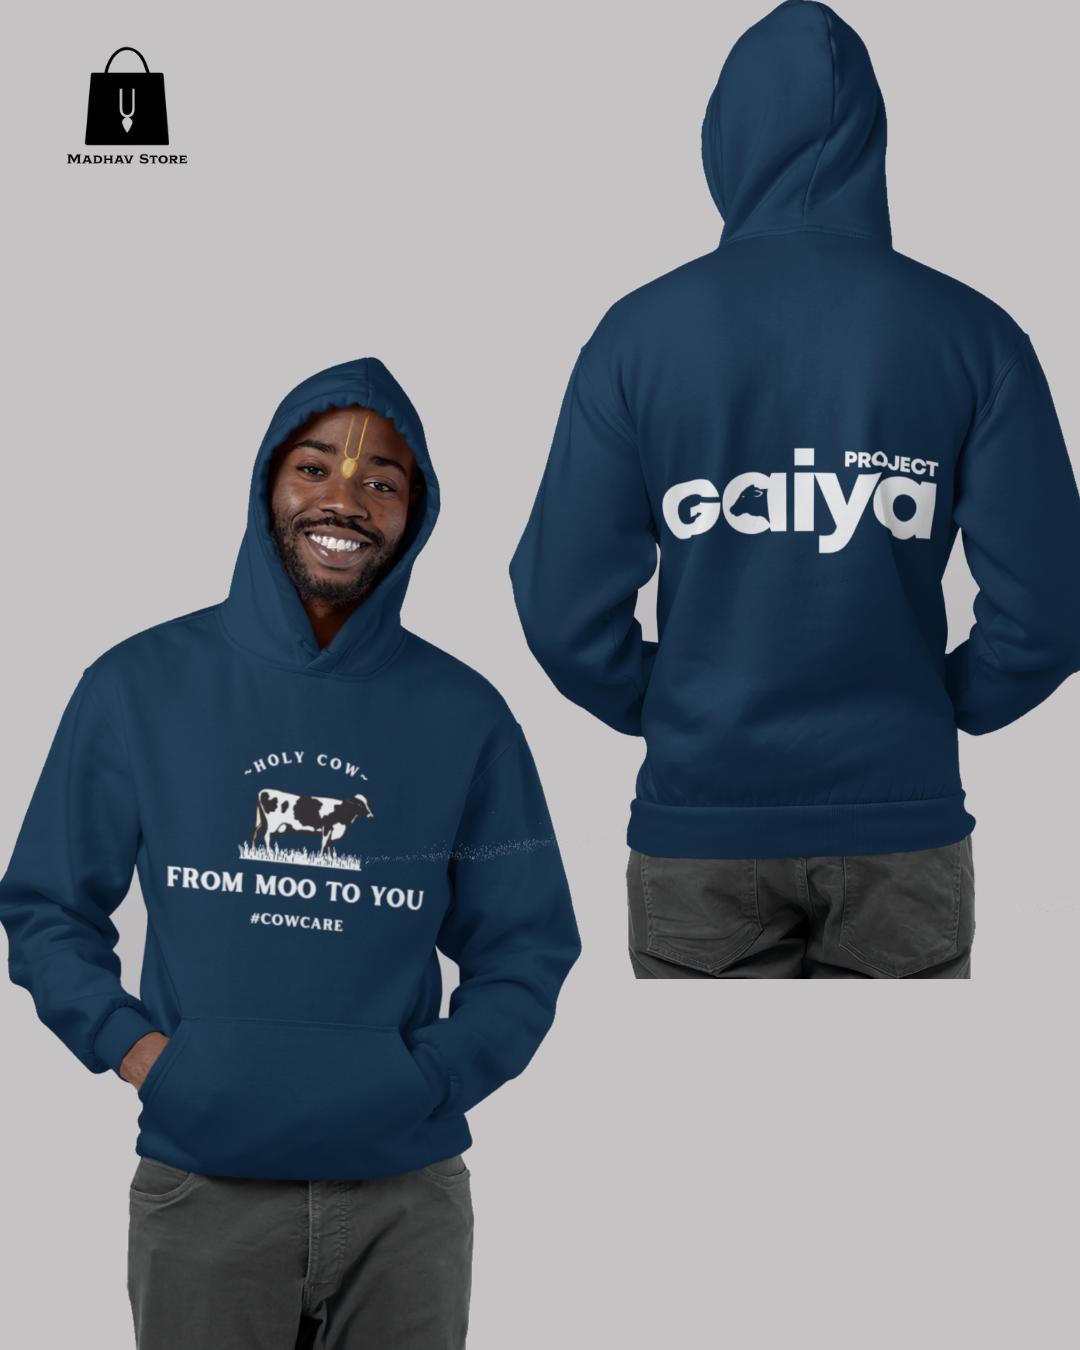 From Moo to You & Project GAIYA | Premium Cotton Hoodie for Men